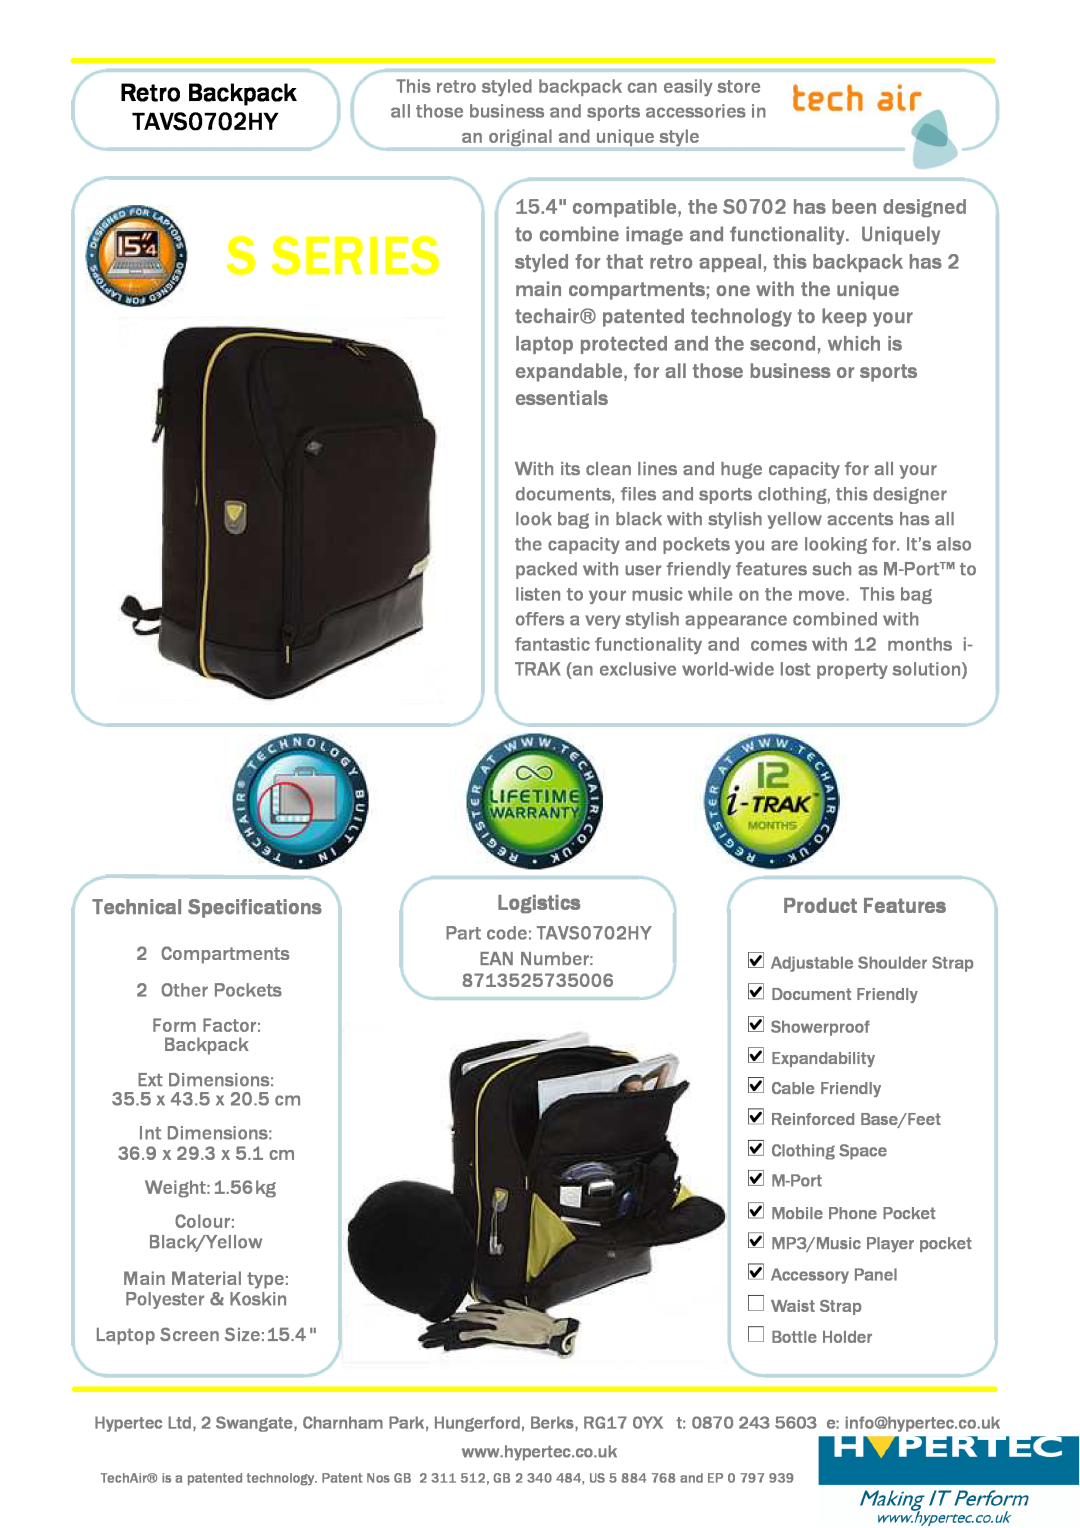 Hypertec TAVS0702HY technical specifications Retro Backpack, Technical Specifications, Logistics, Product Features 